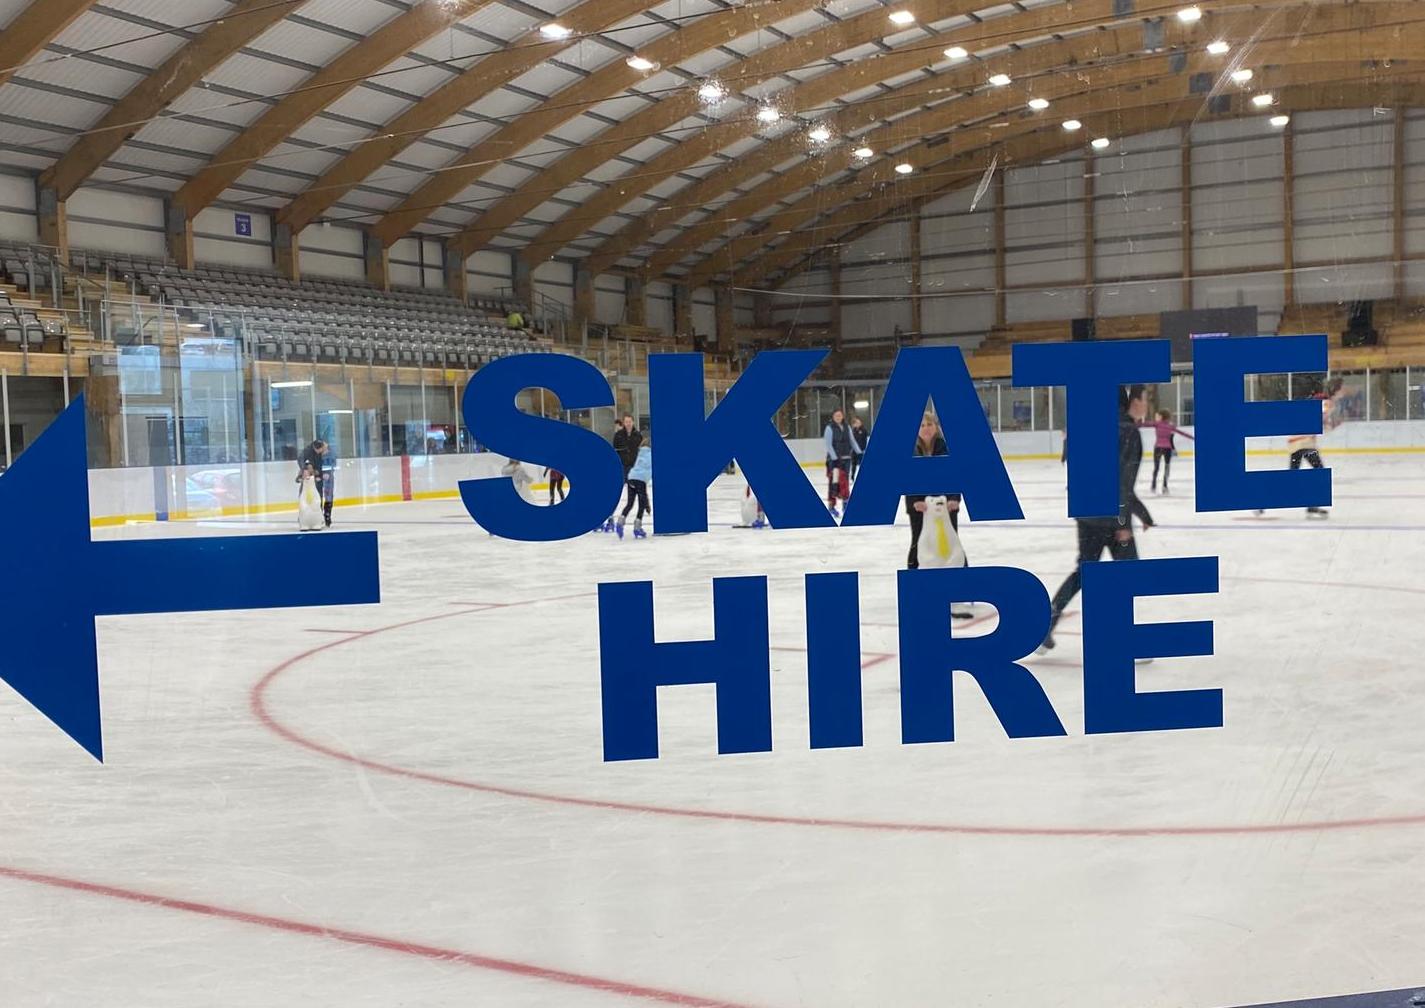 There is an extra charge for skate hire